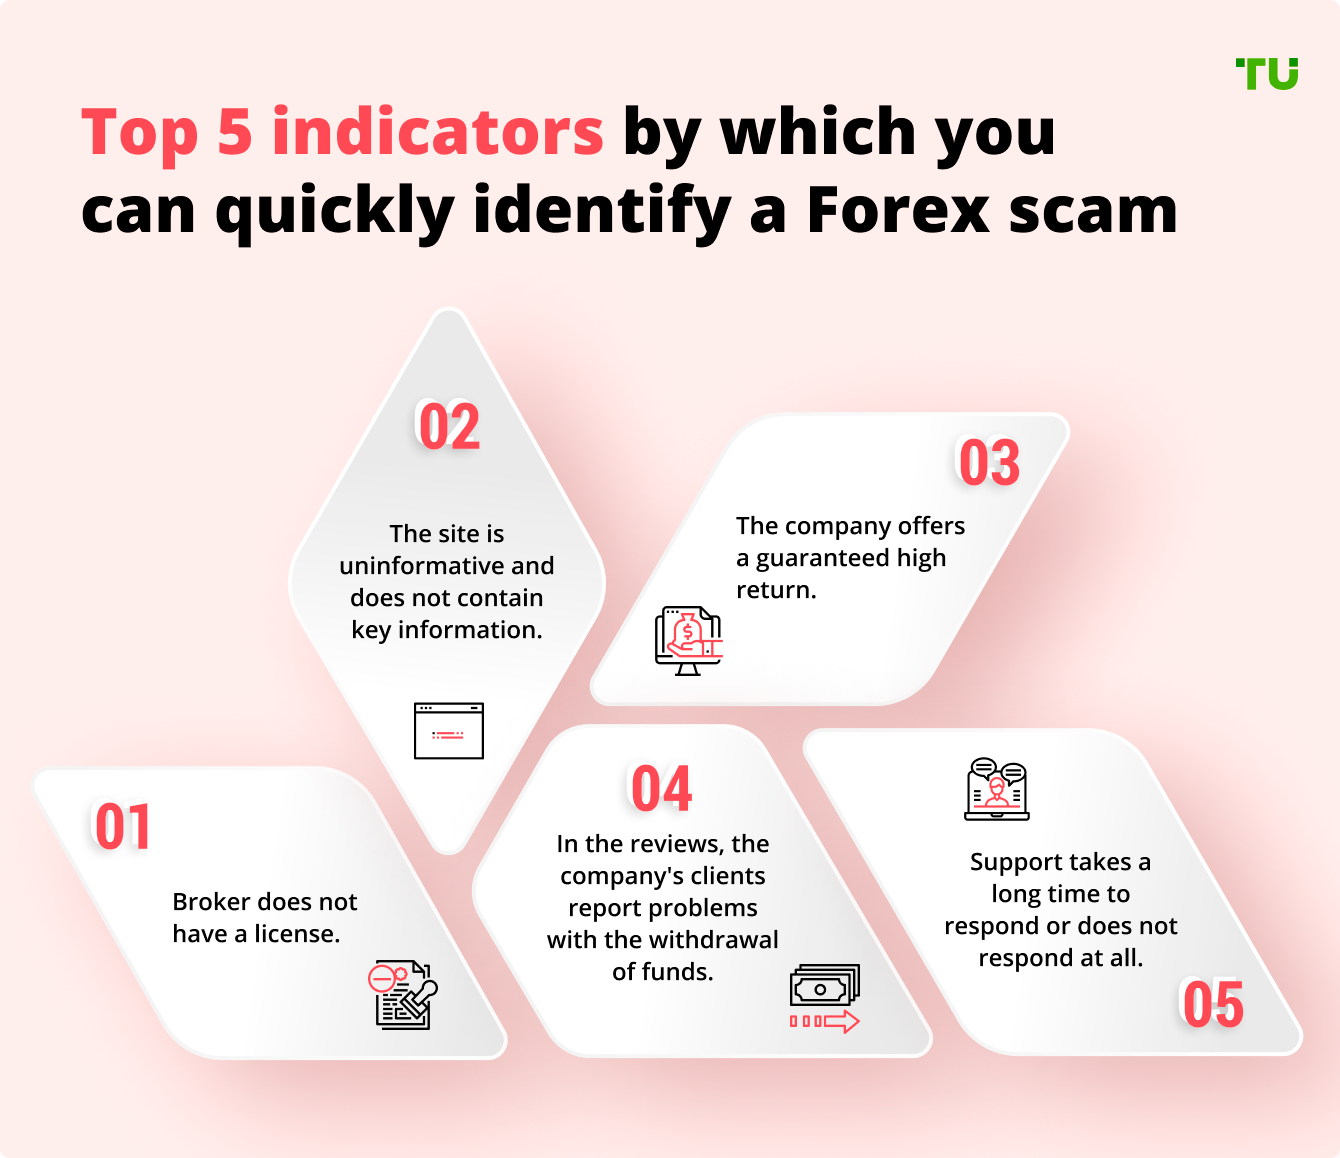 Top 5 indicators by which you can quickly identify a Forex scam